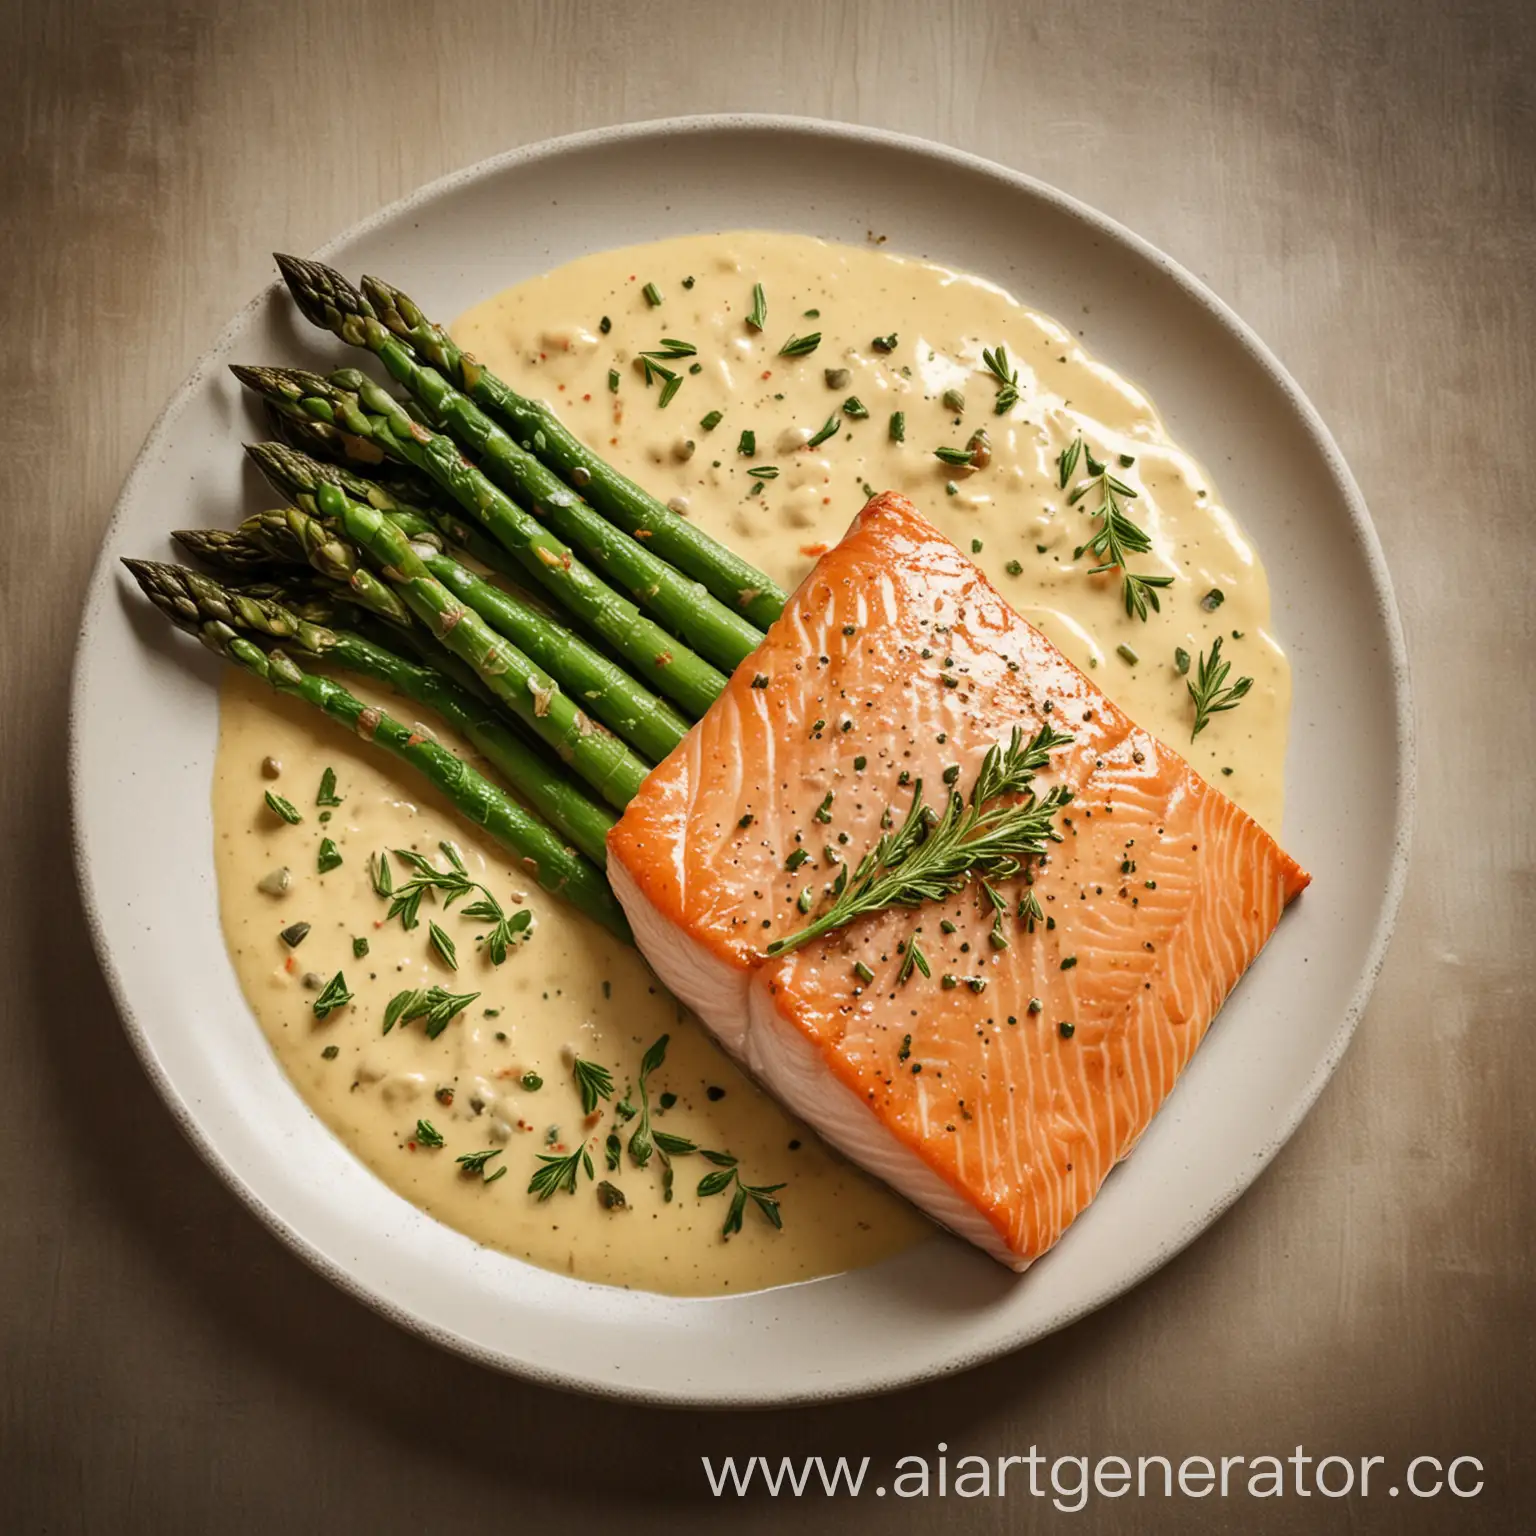 Elegant-Salmon-Dish-with-Asparagus-and-Beige-Sauce